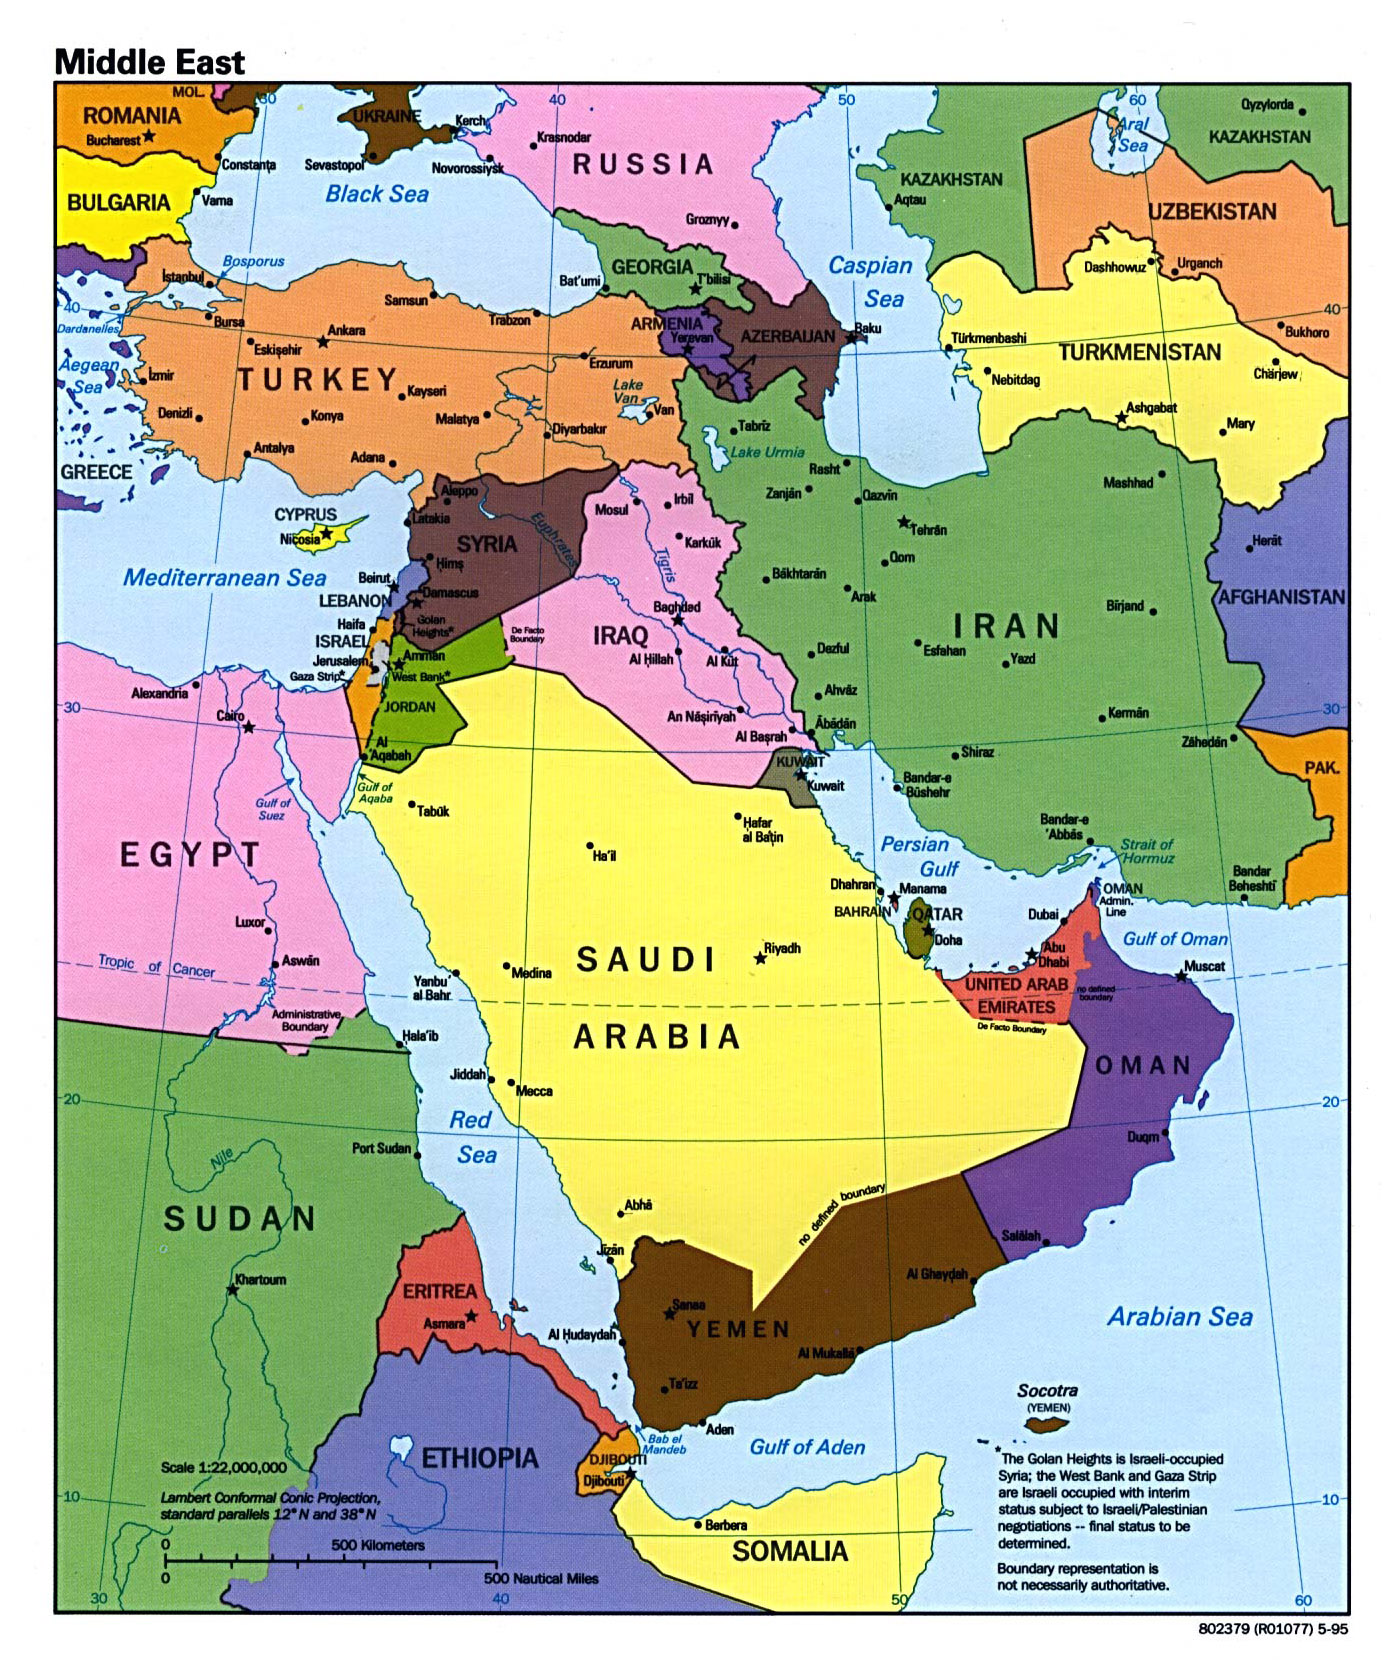 https://www.mapsland.com/maps/asia/middle-east/large-political-map-of-the-middle-east-with-major-cities-and-capitals-1995.jpg